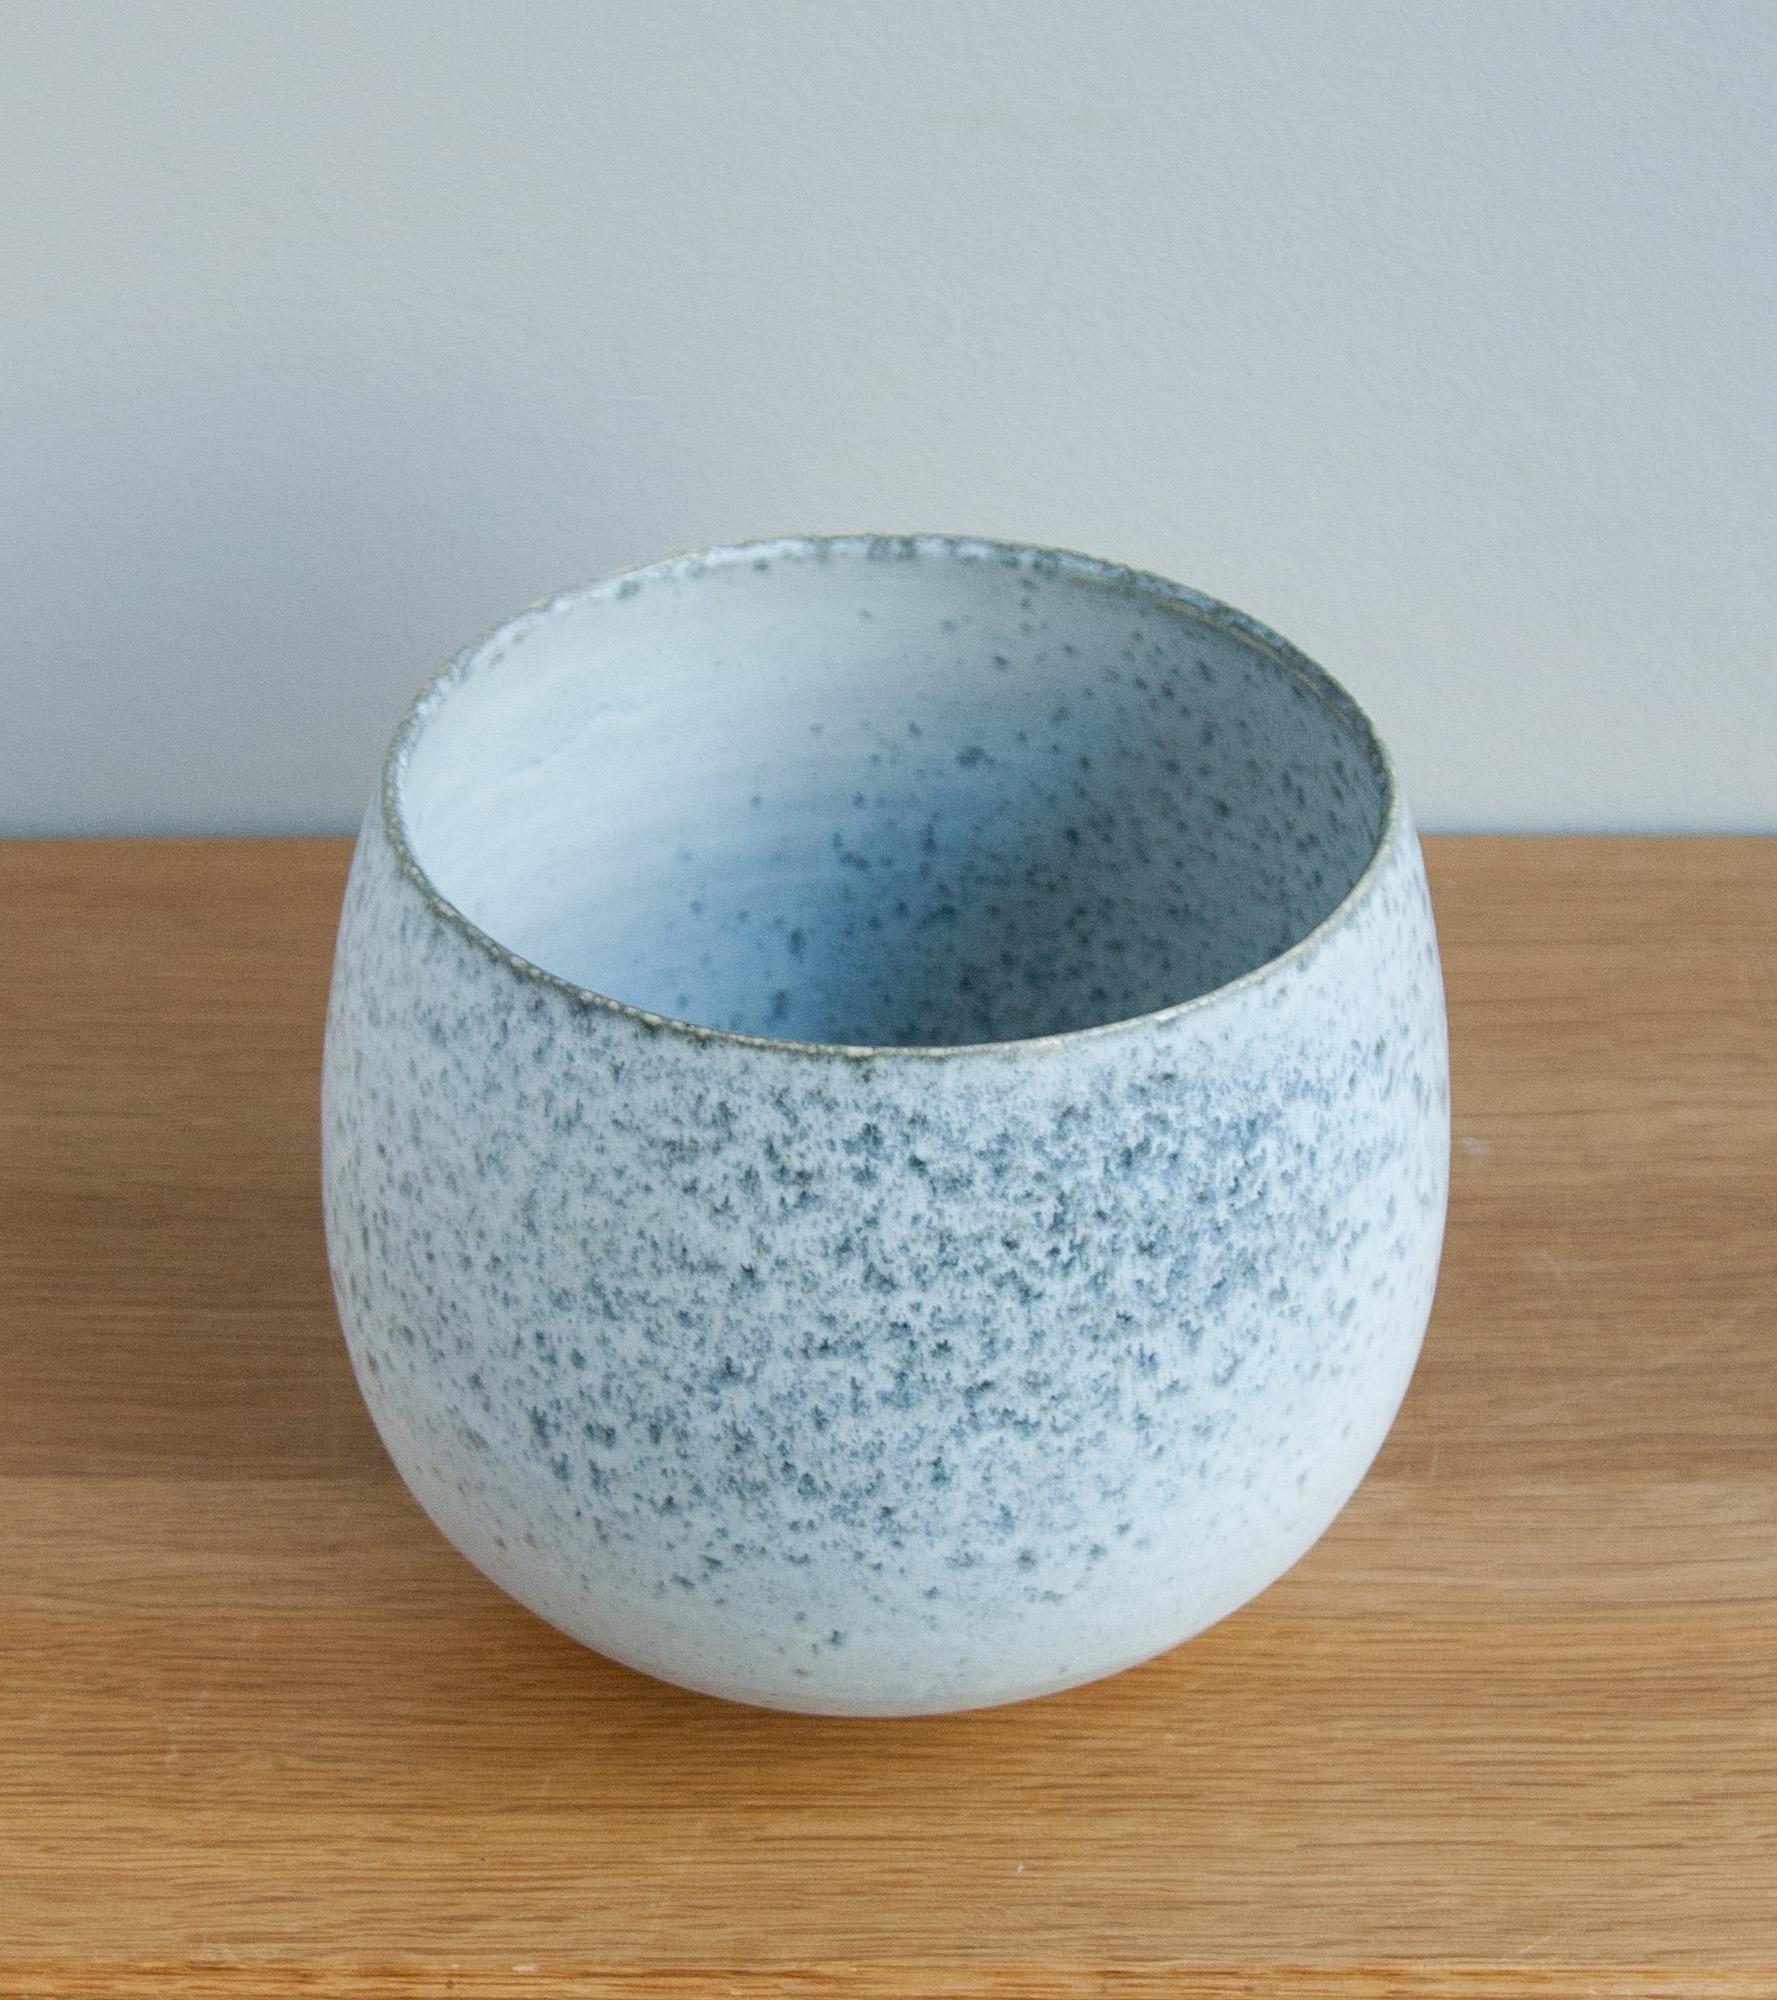 Aage and Kasper Würtz are a father and son team of studio ceramicists based near Horsens in eastern Jutland, Denmark. Known internationally for their hand-thrown and hand-glazed ceramics they have produced bespoke collections for distinguished fine